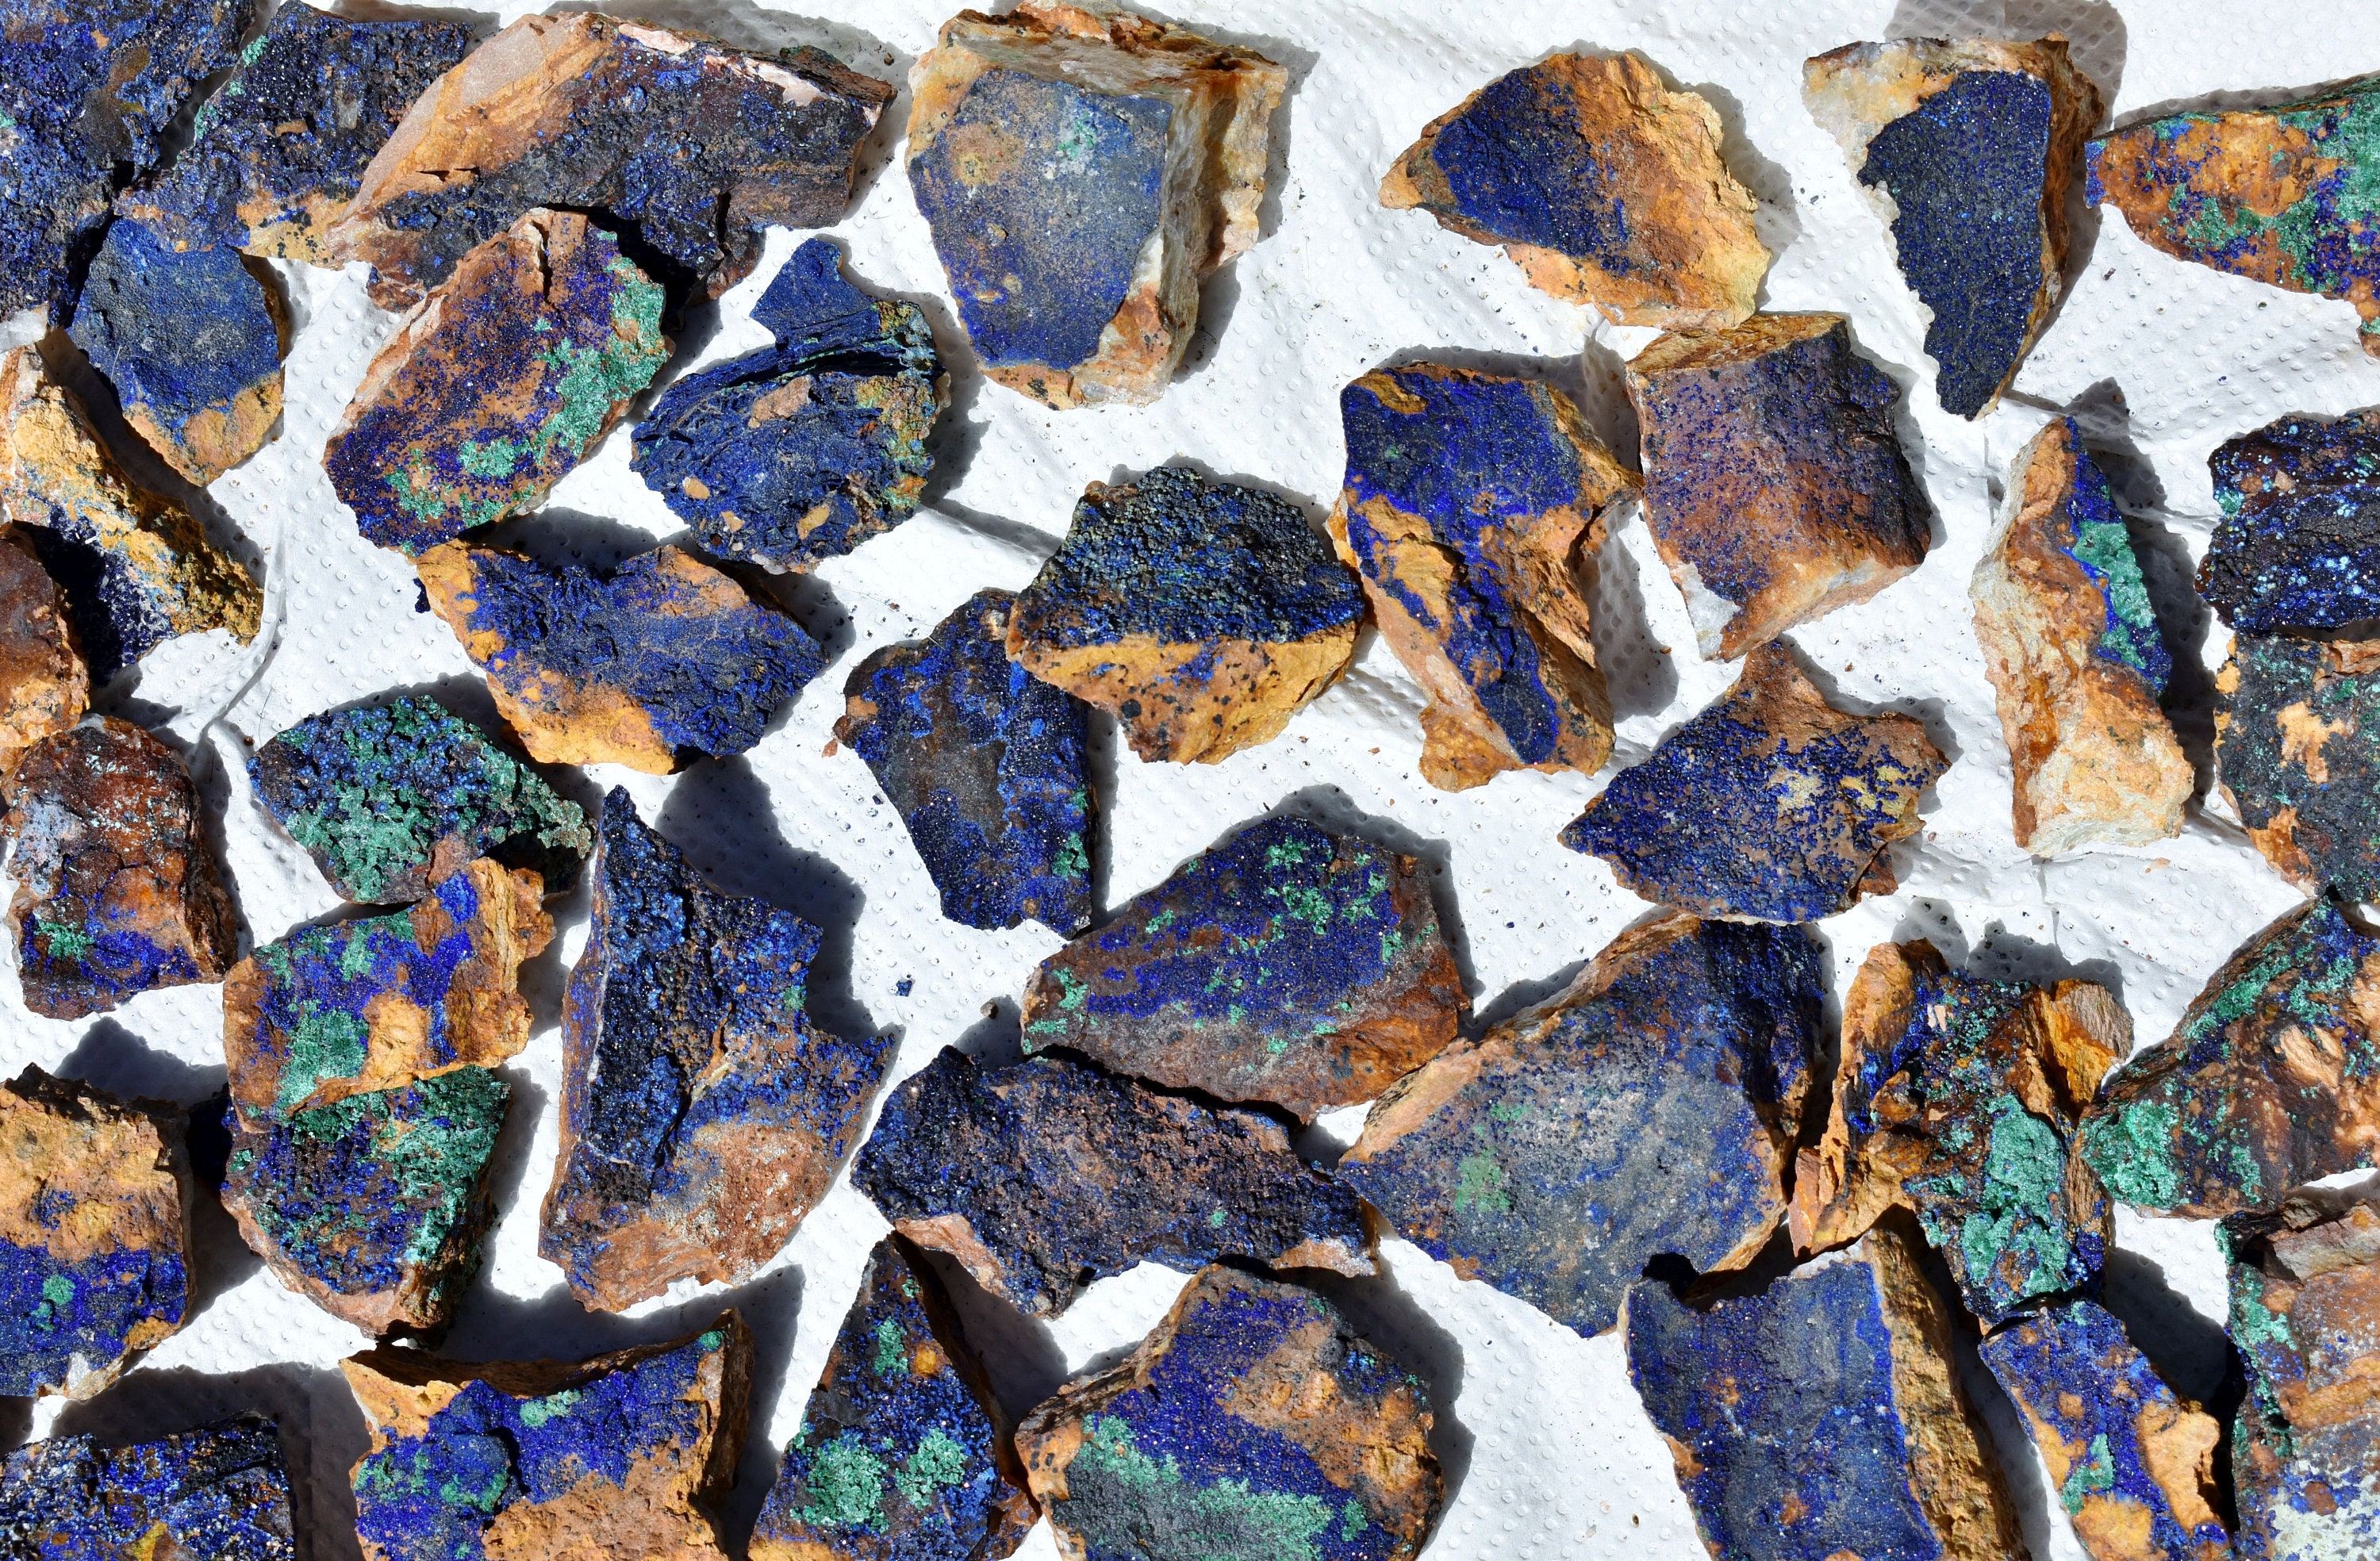 Azurite: The blue gem material, ore of copper, and pigment.